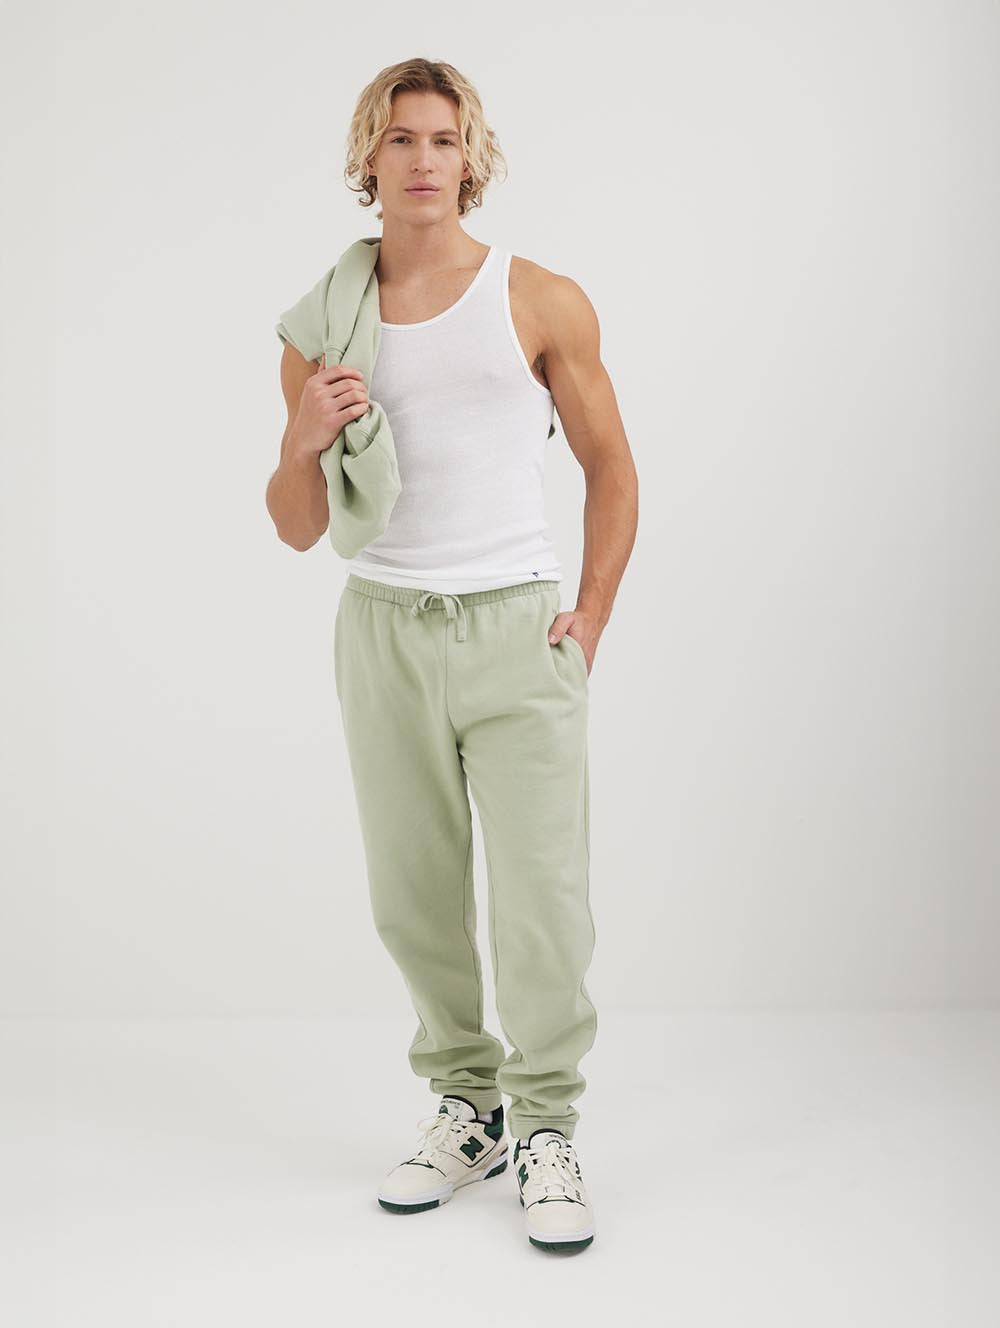 fcity.in - 12 Light Green Track Pant 22 / Urban Buccachi Men Track Pants